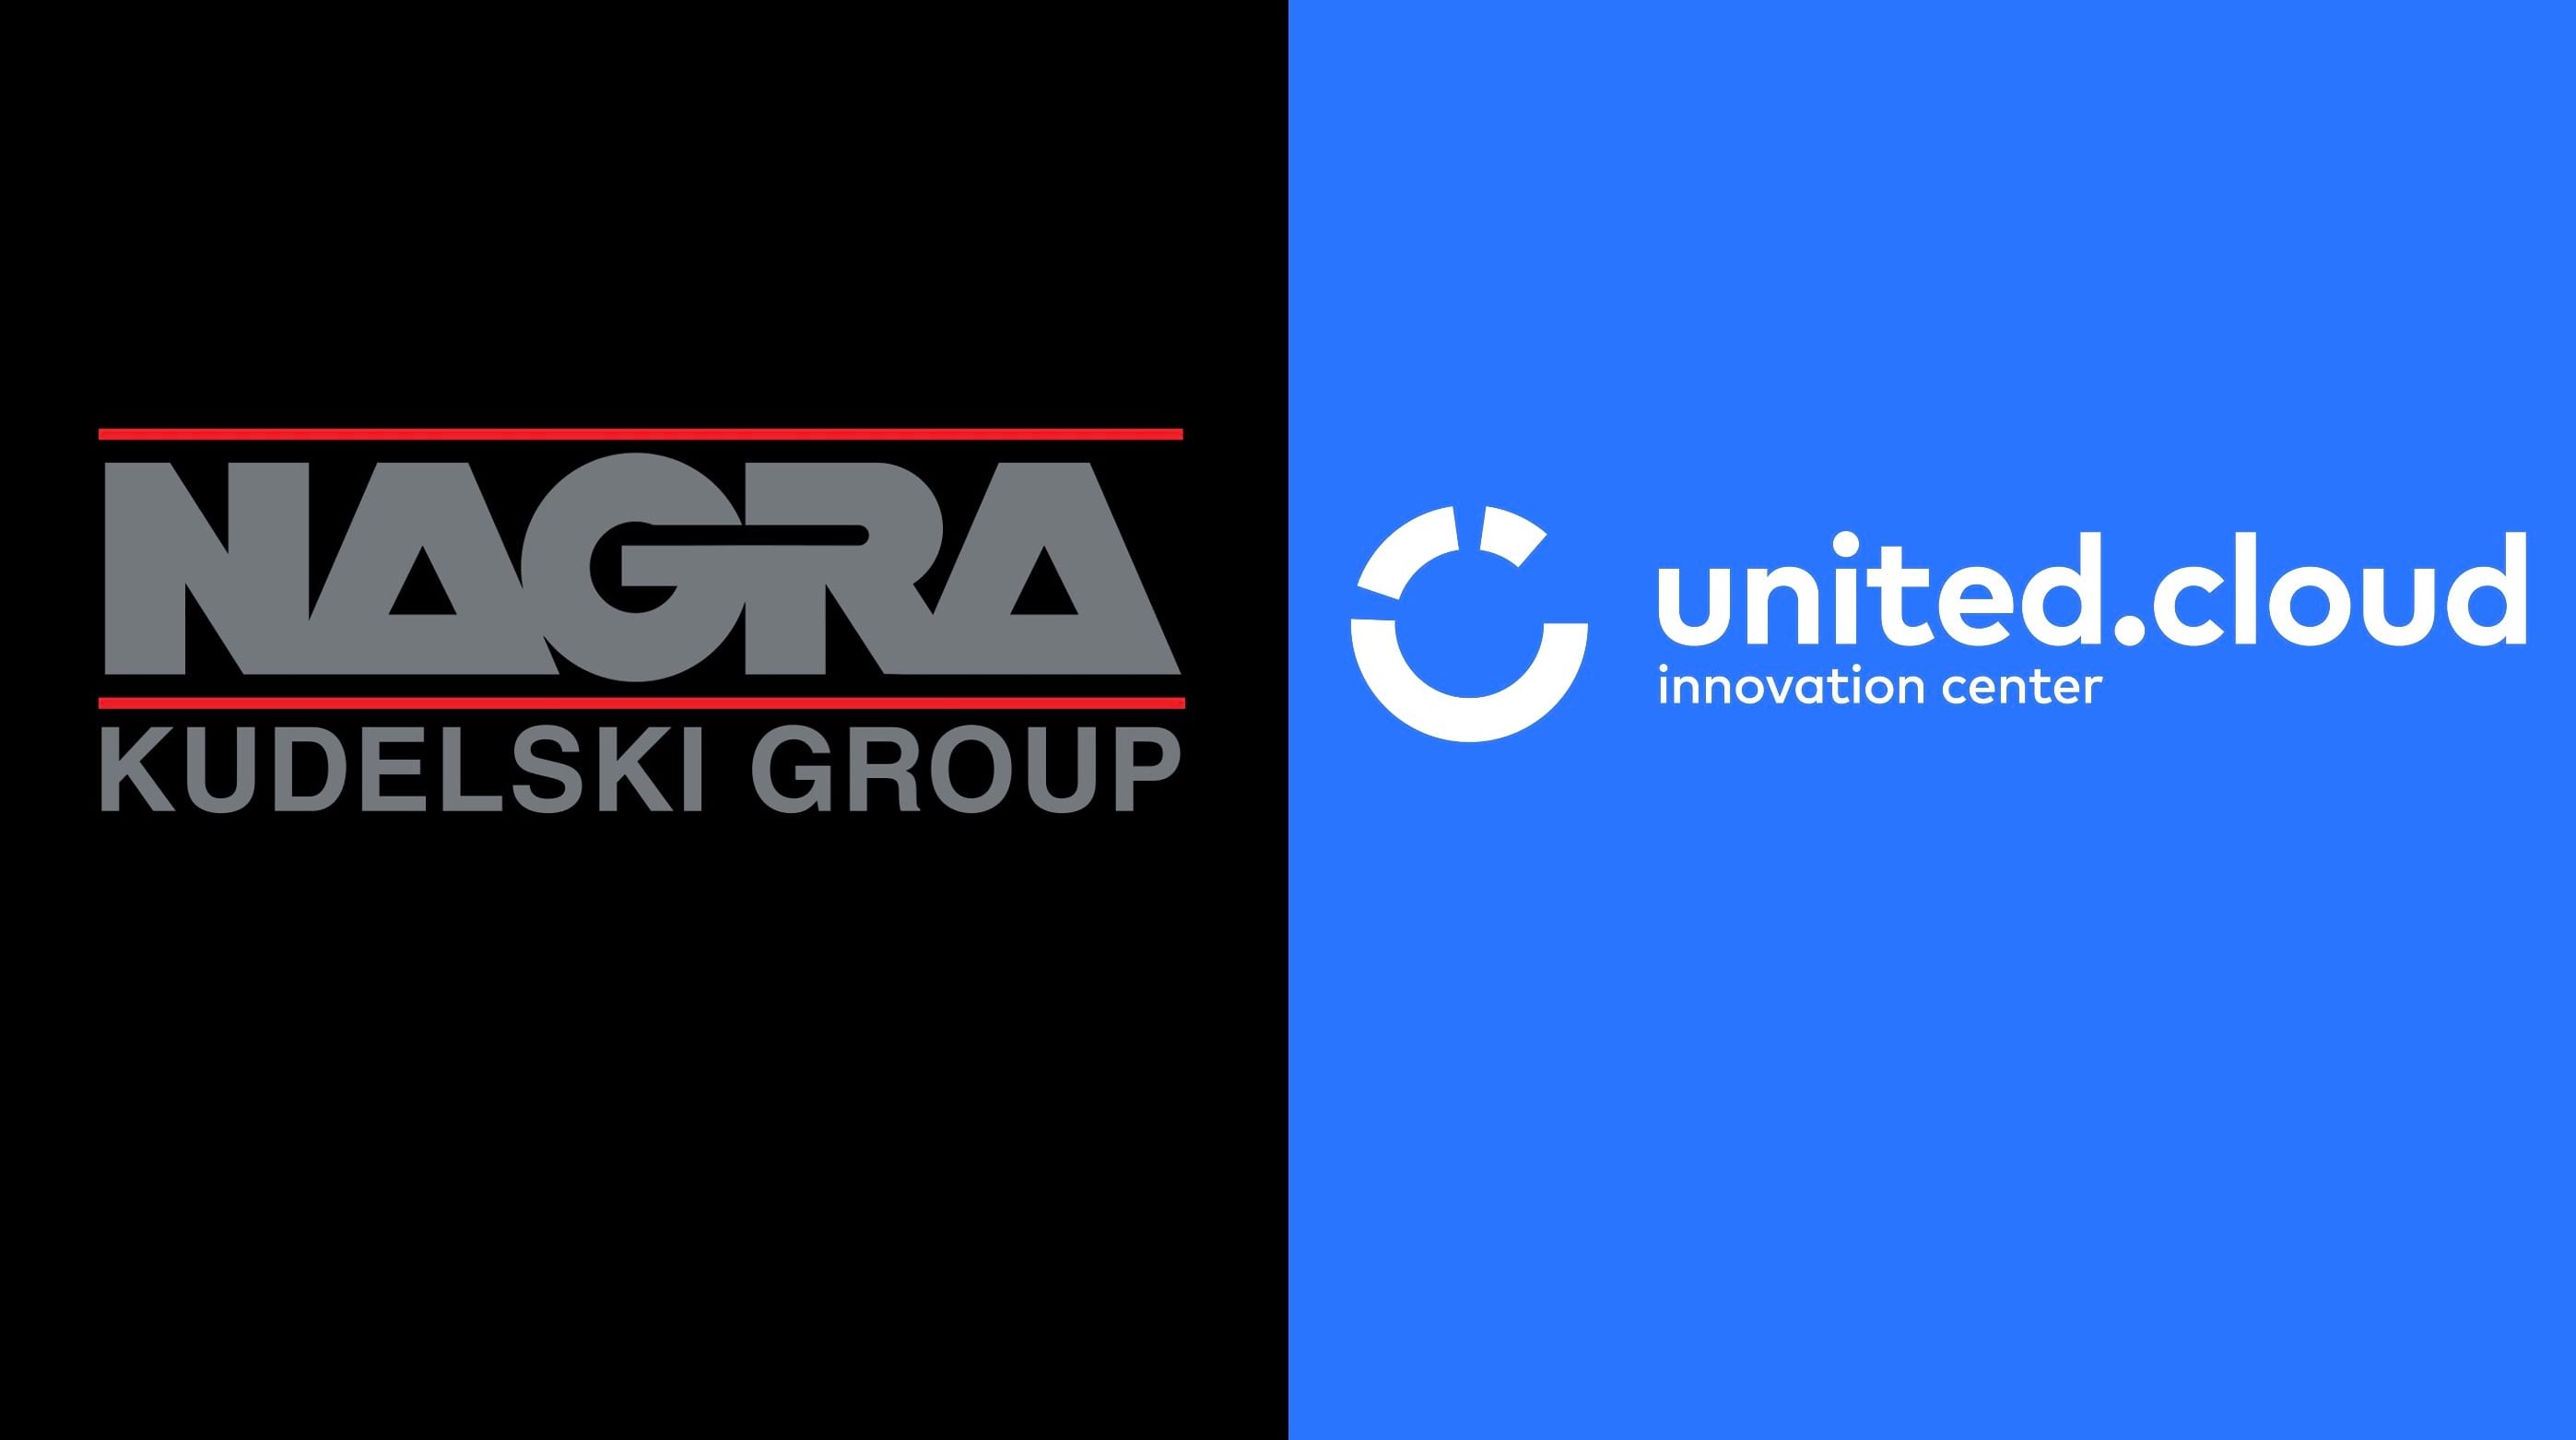 UNITED CLOUD LEVERAGES NAGRA FORENSIC WATERMARKING SOLUTIONS TO SHUTDOWN PIRACY IN REAL TIME AT THE SOURCE